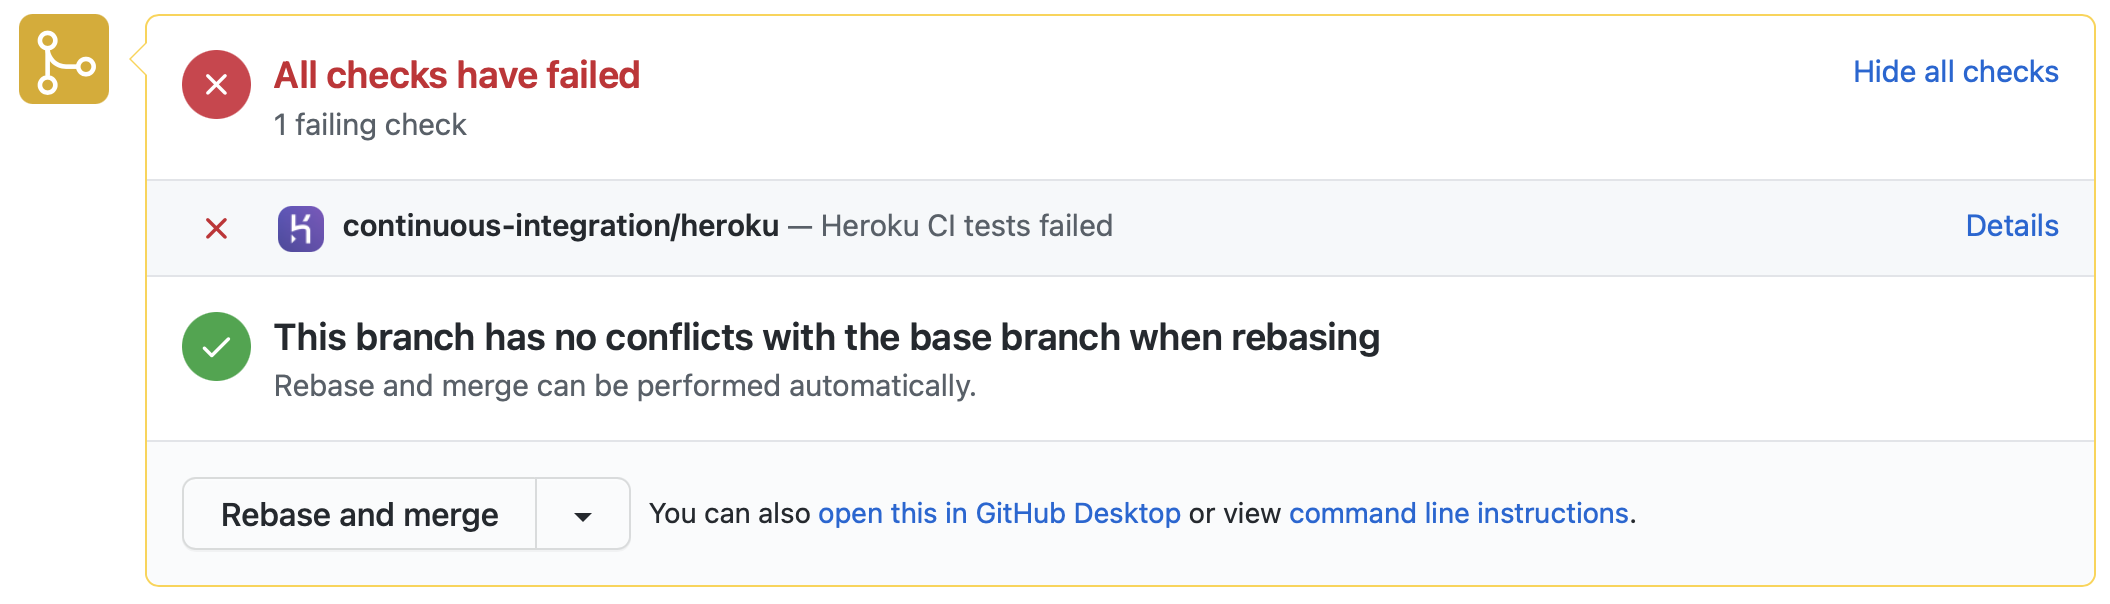 Heroku status reported to Github without any test results, just pass or fail.